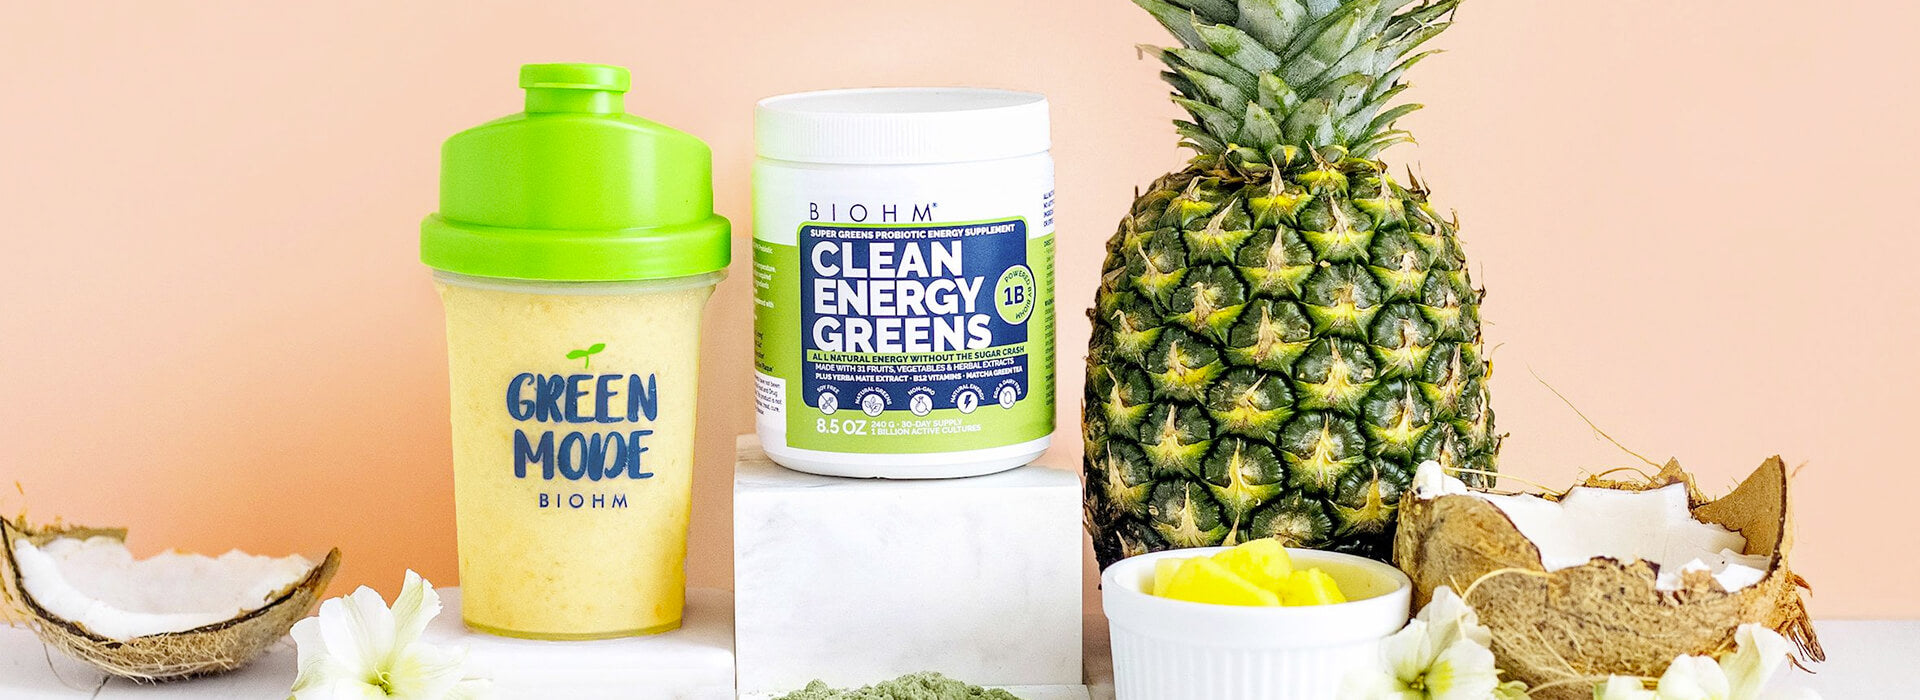 BIOHM Clean energy greens and Green mode shaker 